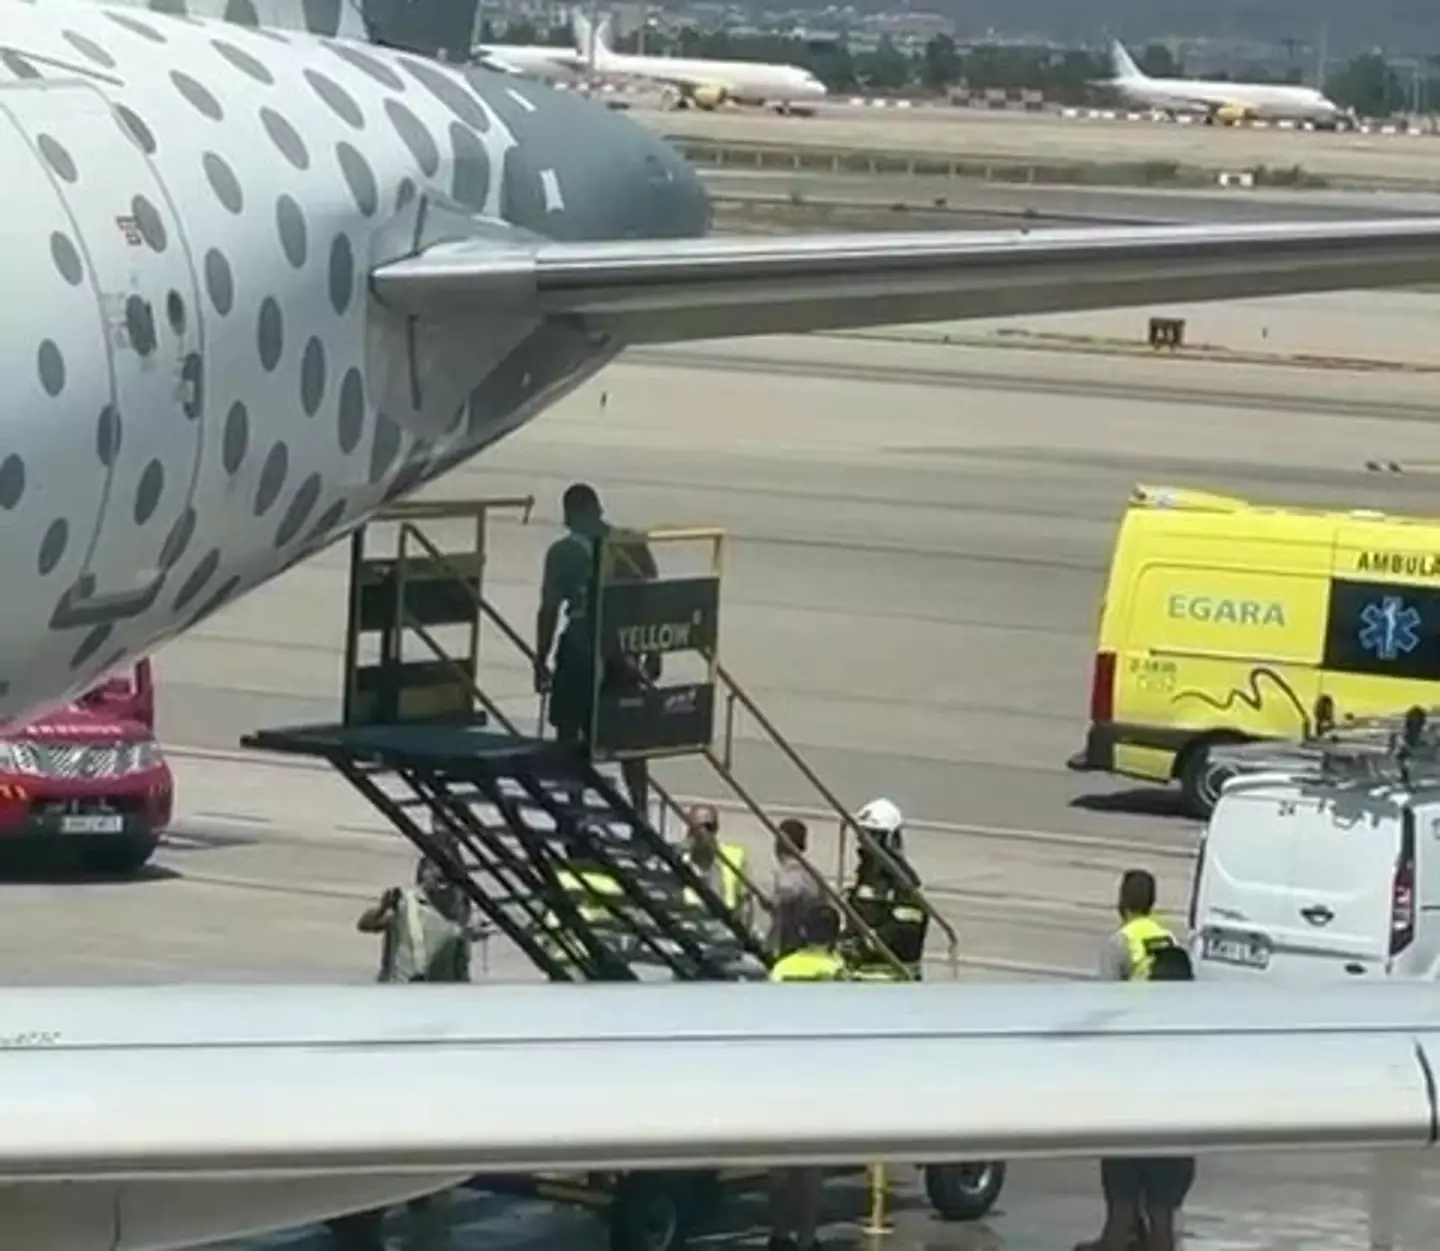 The plane was due to travel from Barcelona to Birmingham.